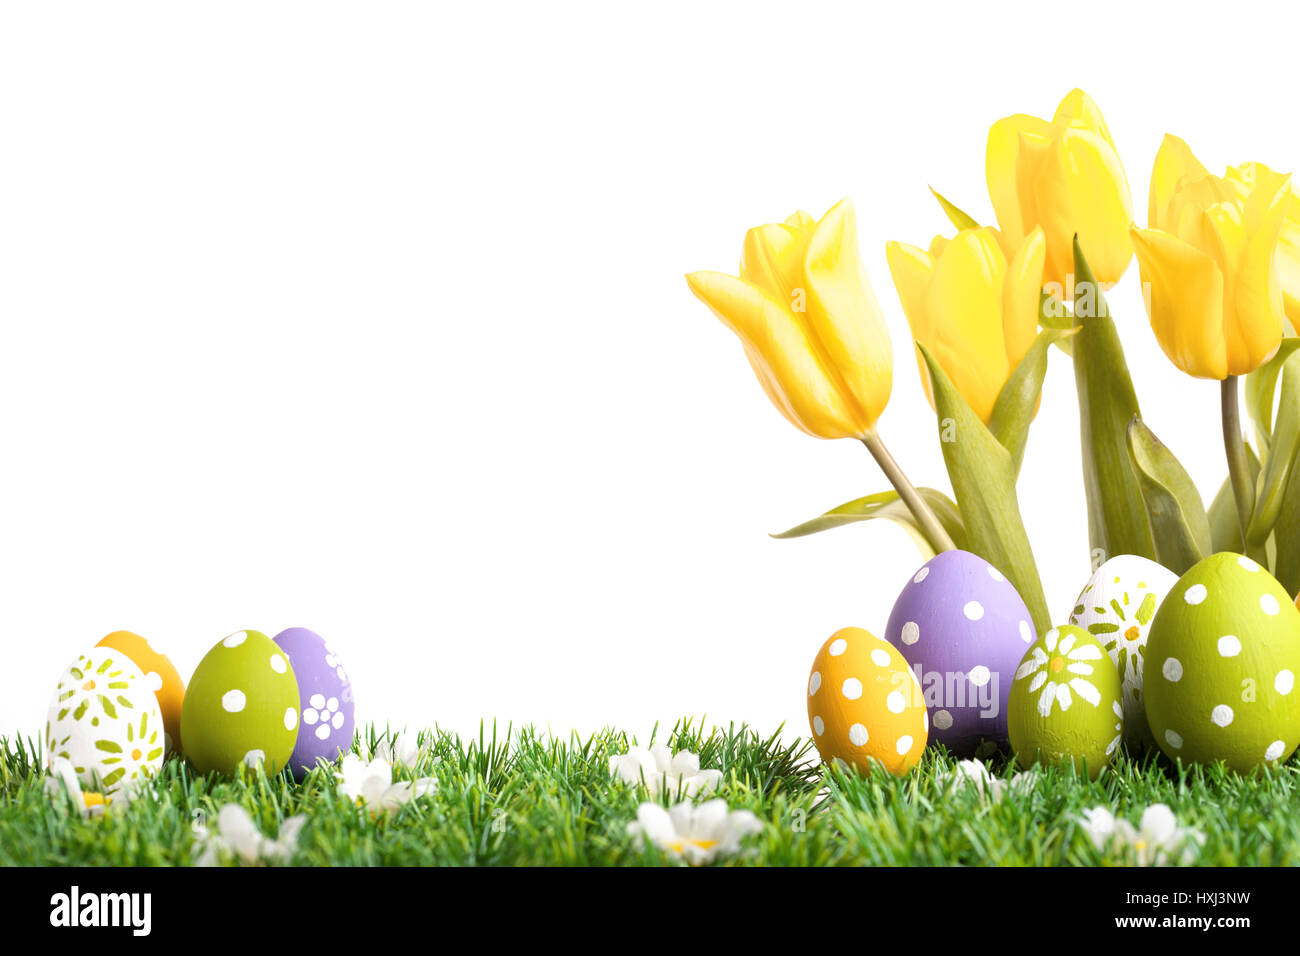 Easter eggs hiding in the grass with four tulips Stock Photo